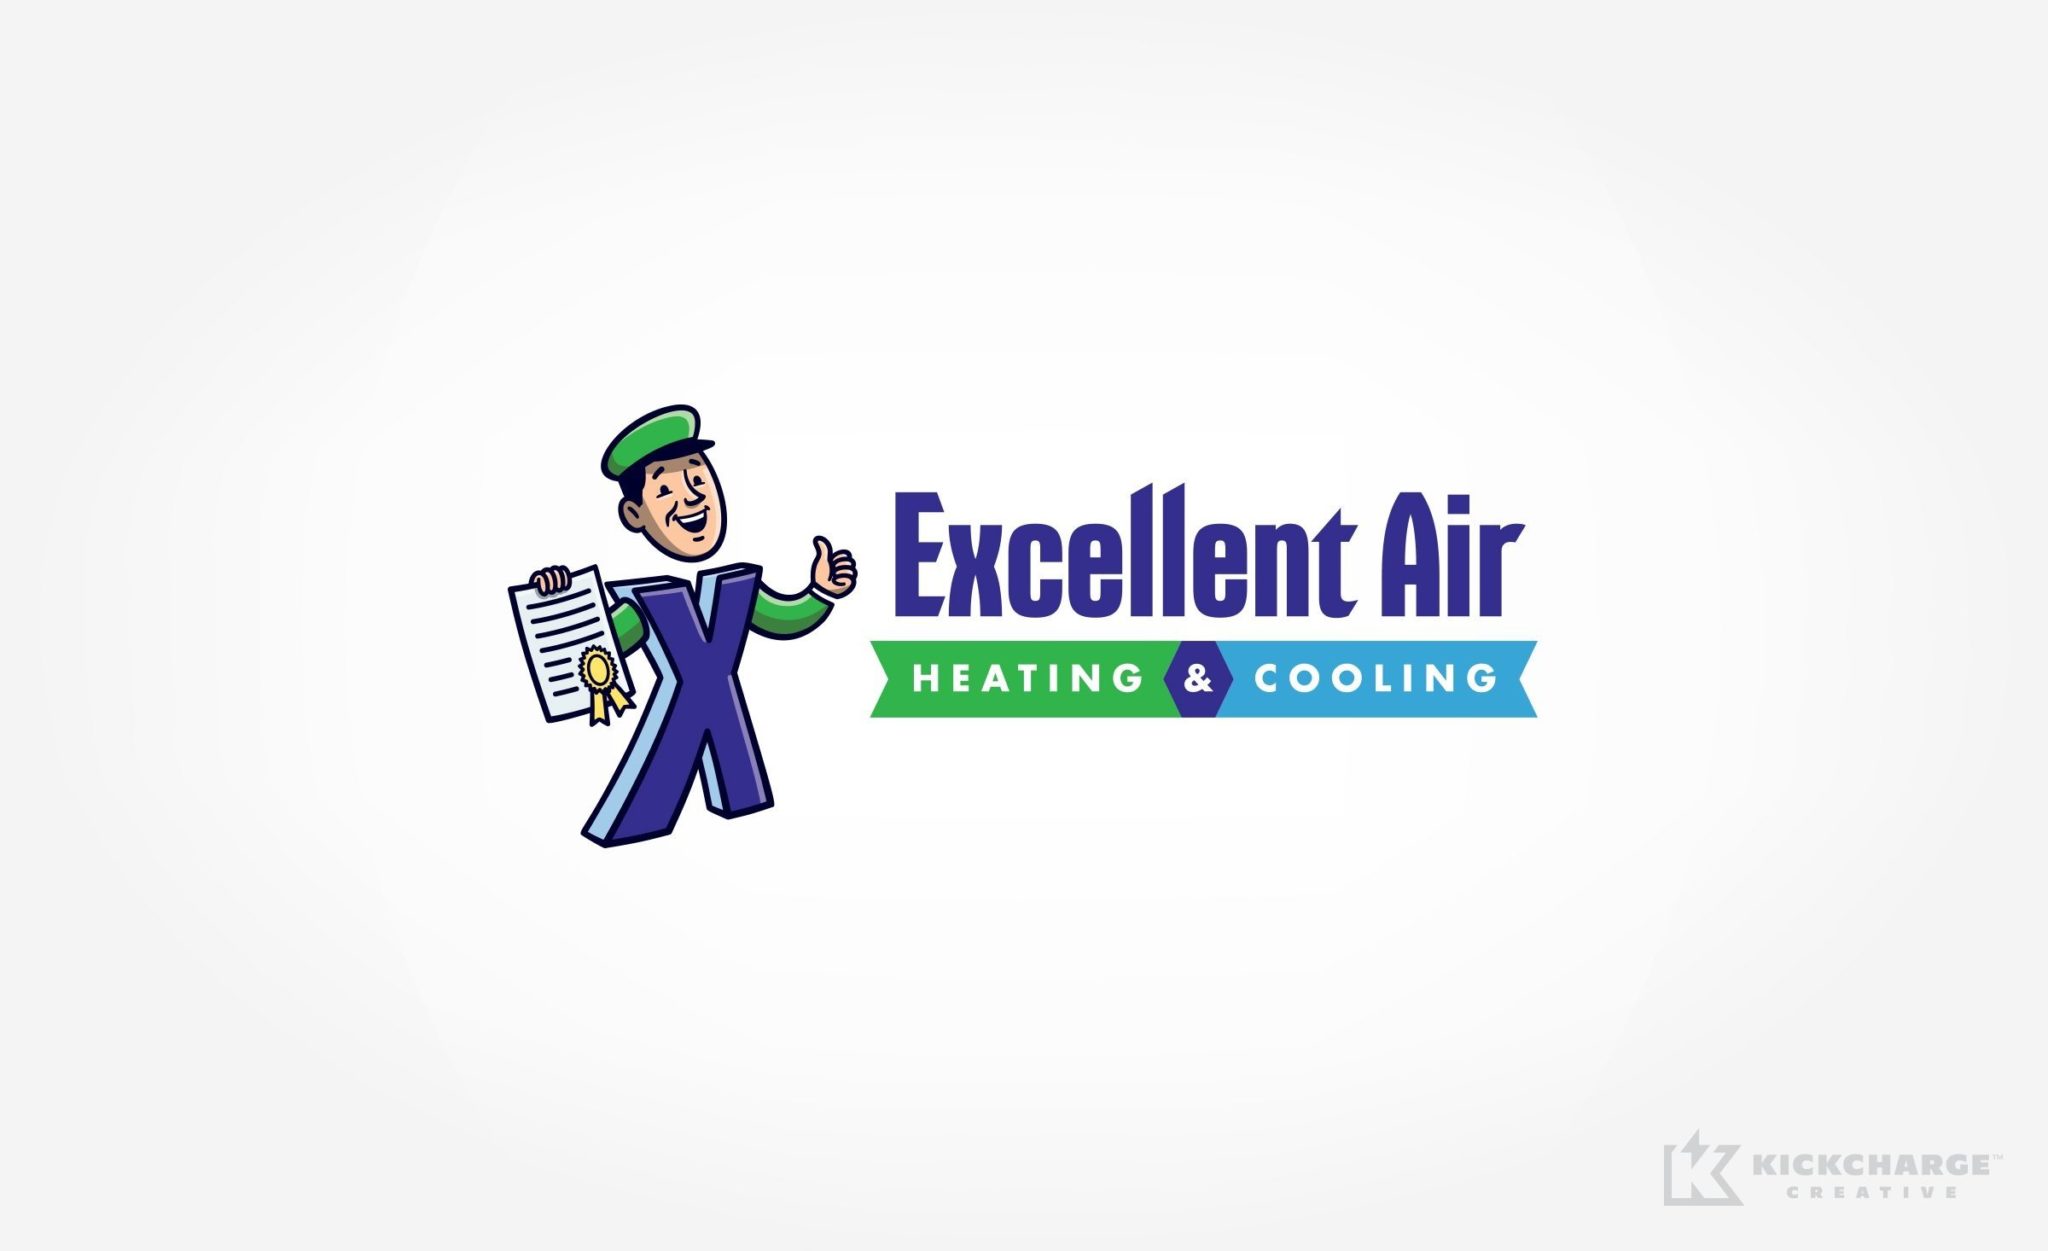 Excellent Air Heating & Cooling - KickCharge Creative | kickcharge ...